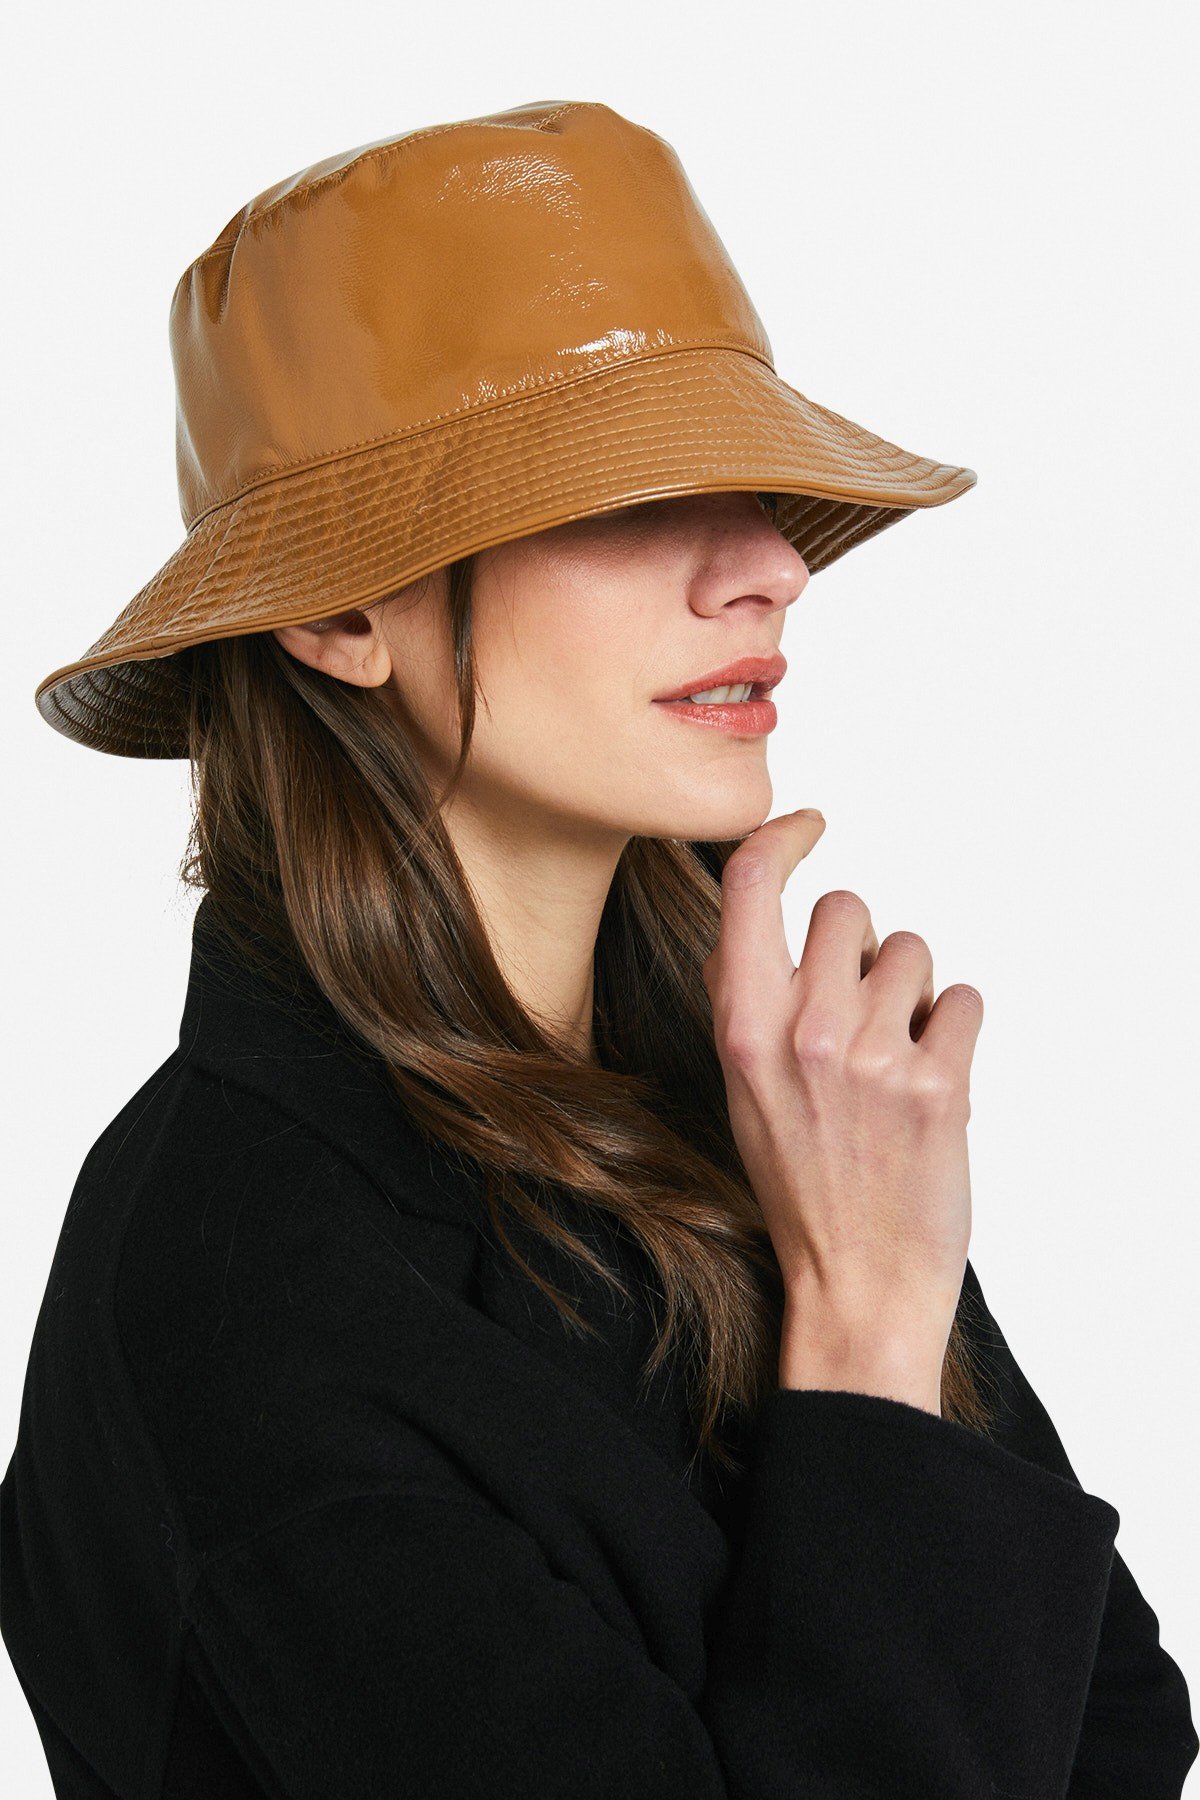 Patent leather hat